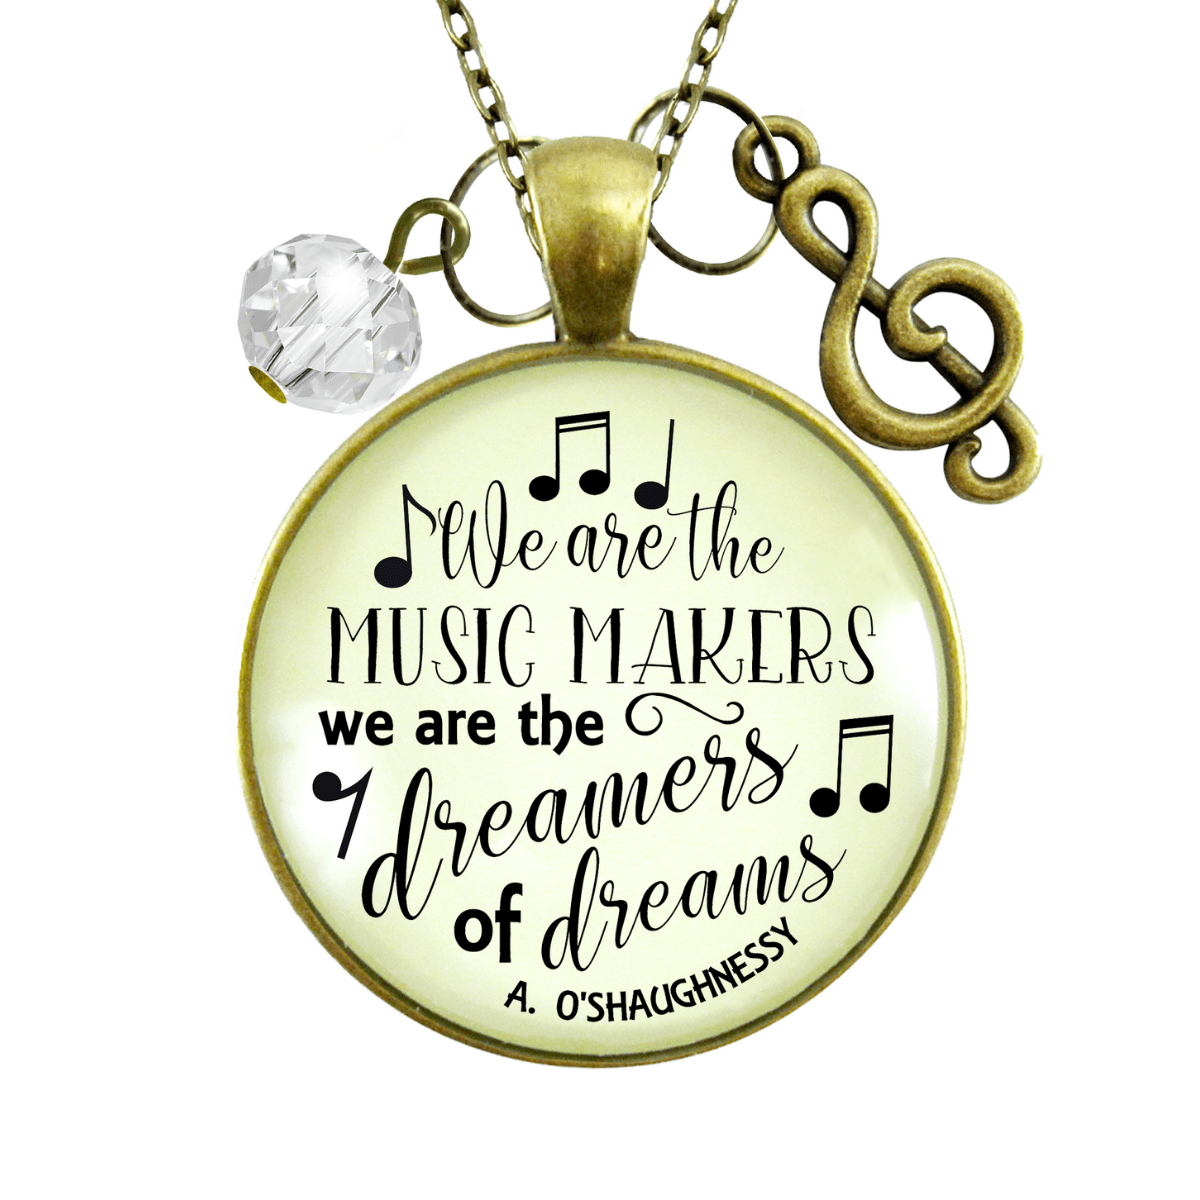 Gutsy Goodness Musician Necklace We are Music Makers Teacher Jewelry G Clef Charm - Gutsy Goodness Handmade Jewelry;Musician Necklace We Are Music Makers Teacher Jewelry G Clef Charm - Gutsy Goodness Handmade Jewelry Gifts